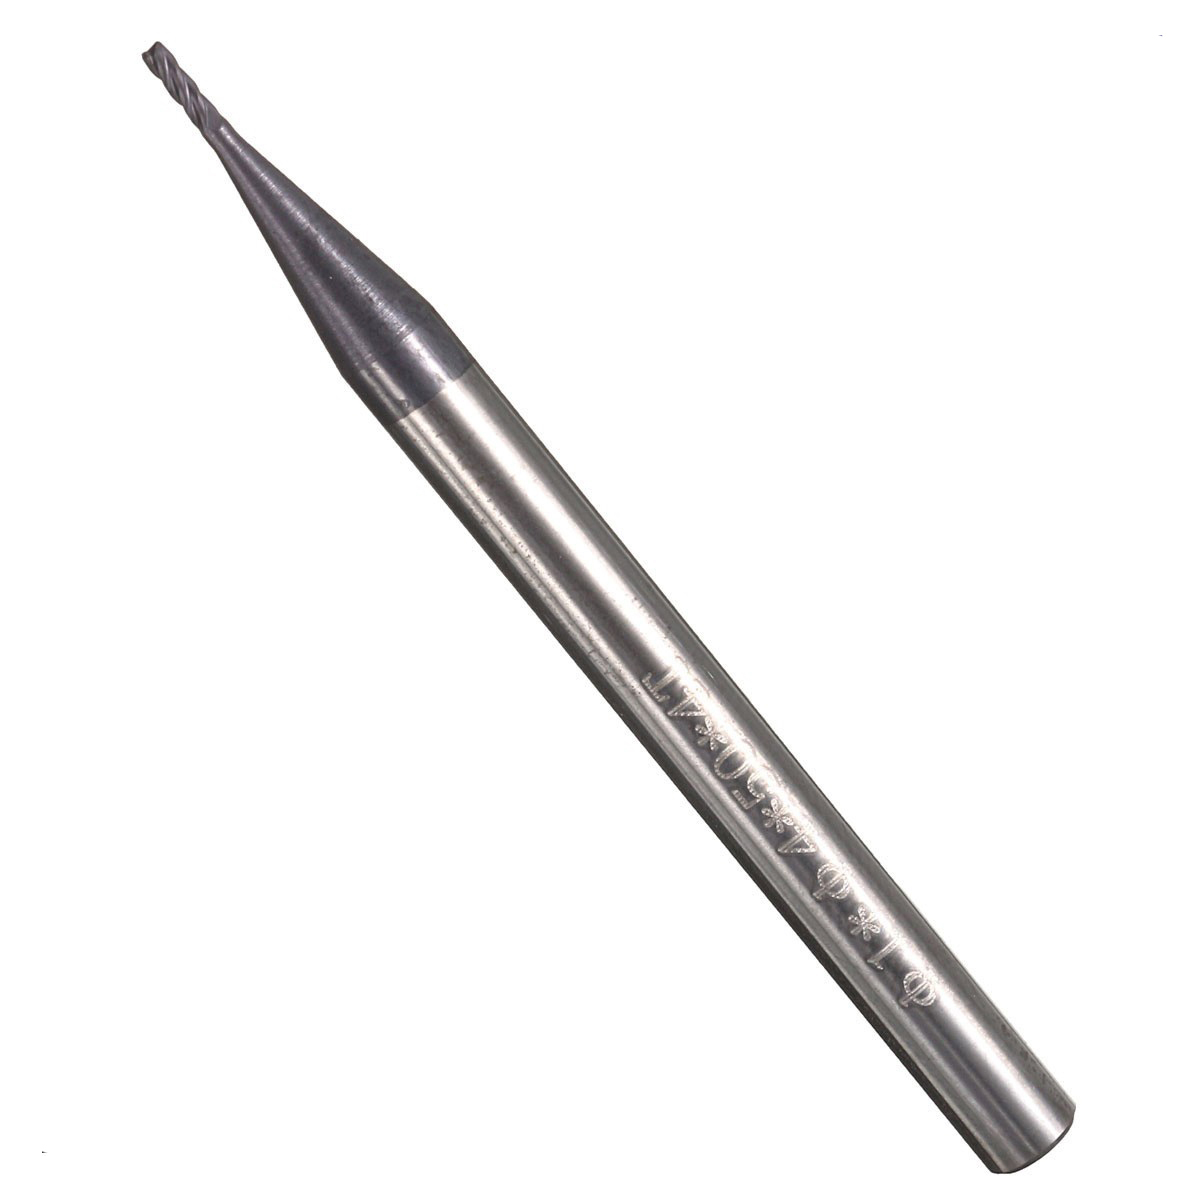 Drillpro-1mm-4-Flutes-End-Mill-Cutter-50mm-Length-Tungsten-Carbide-Milling-Cutter-CNC-Tool-1516233-2